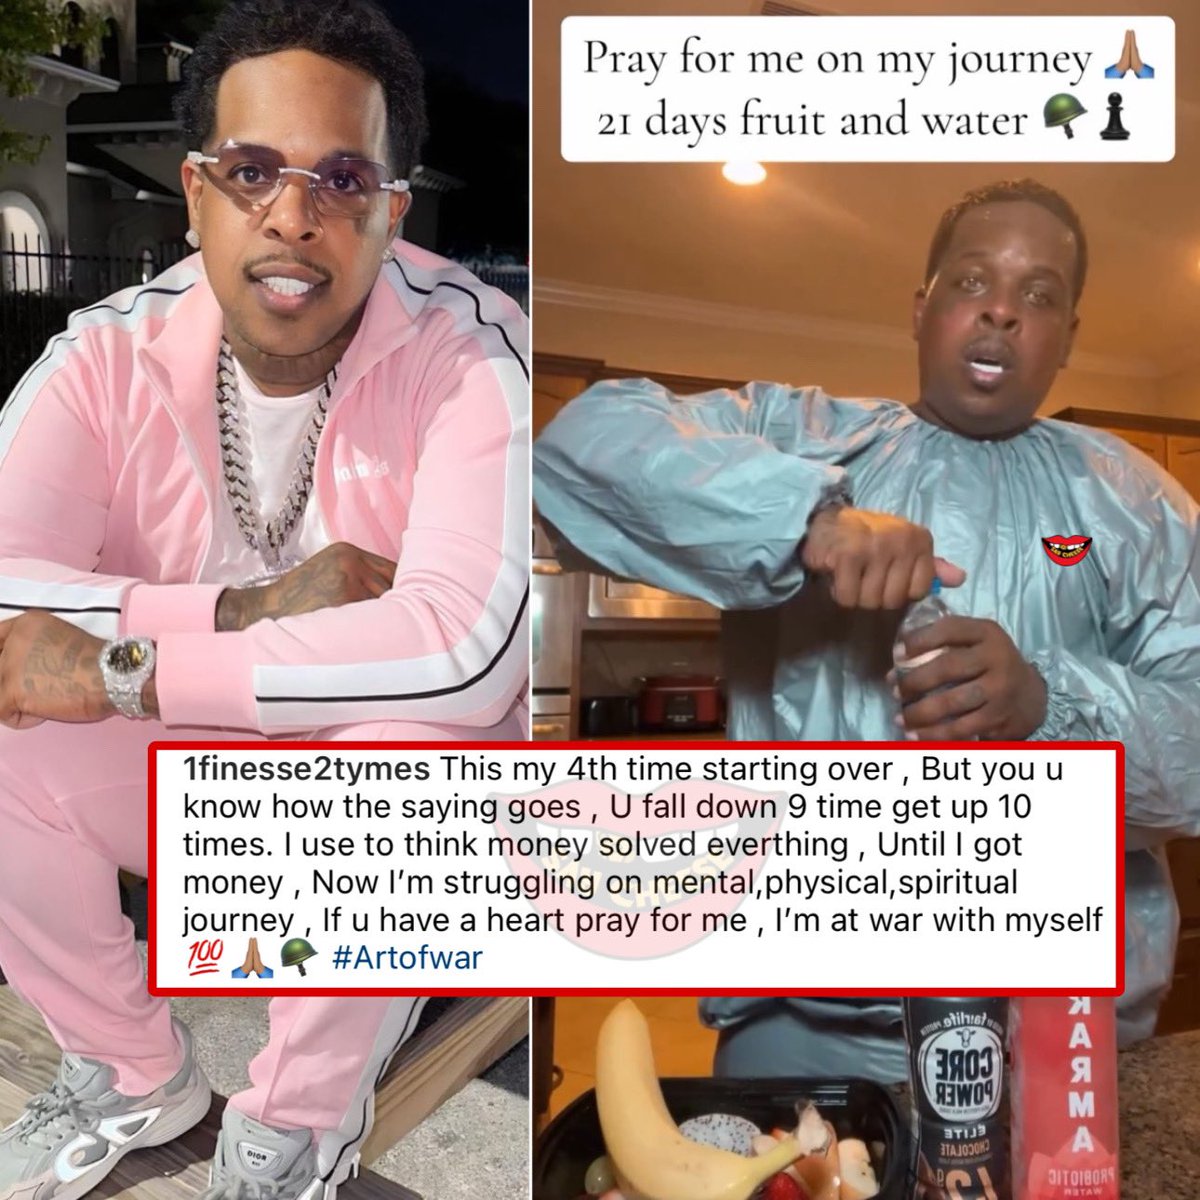 Finesse2tymes asks fans to pray for him on his fitness and health journey, which will consist of only fruit and water for 21 days: “This my 4th time starting over”